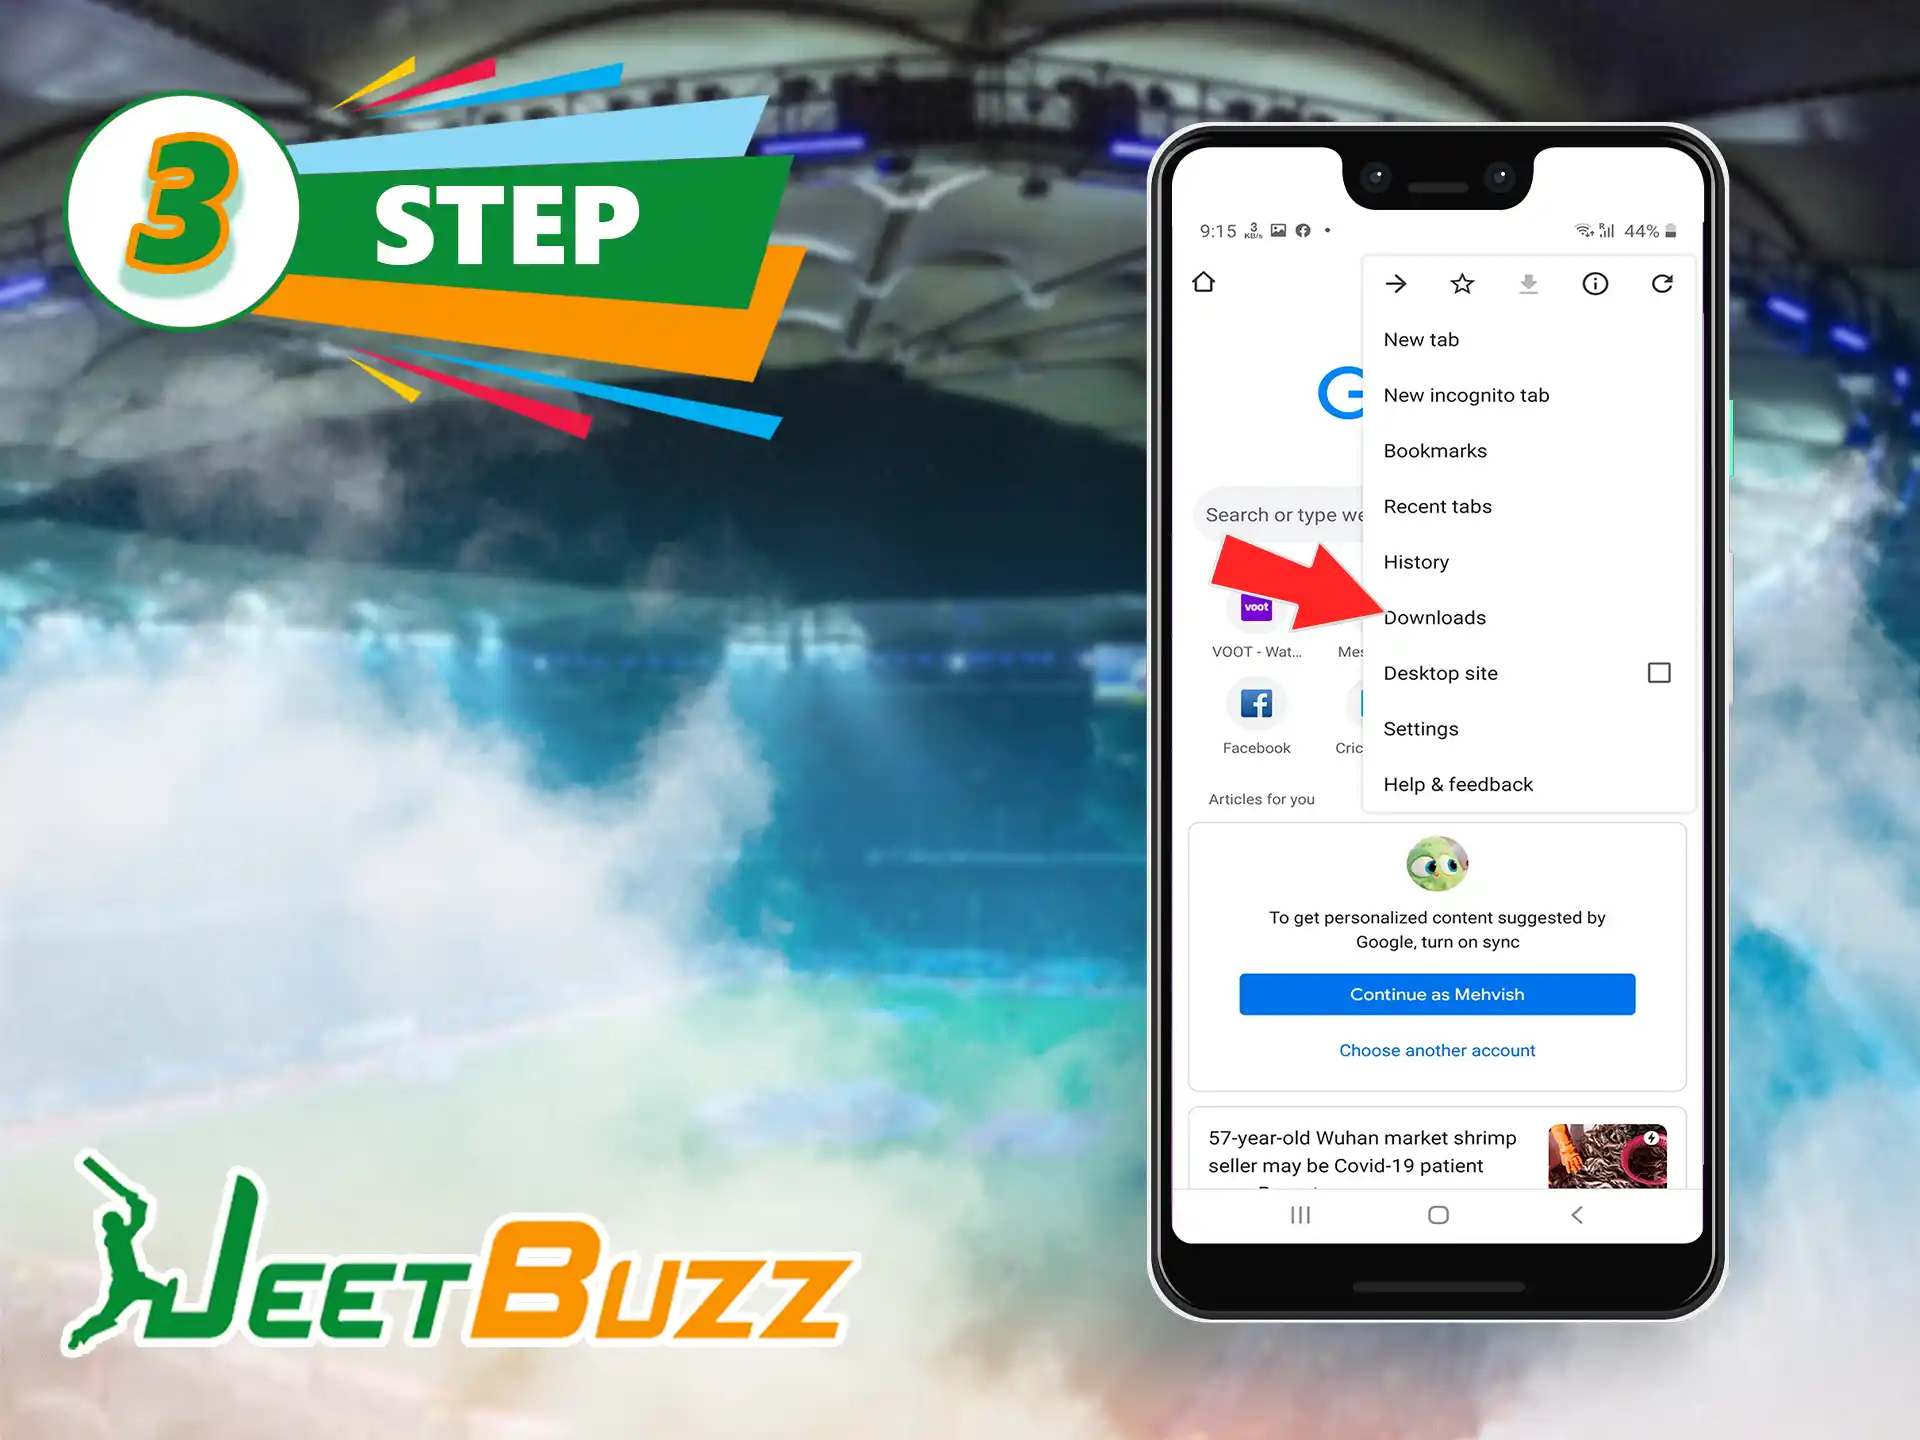 Wait for the progress bar to complete getting the JeetBuzz app on your device, do not interrupt the process.